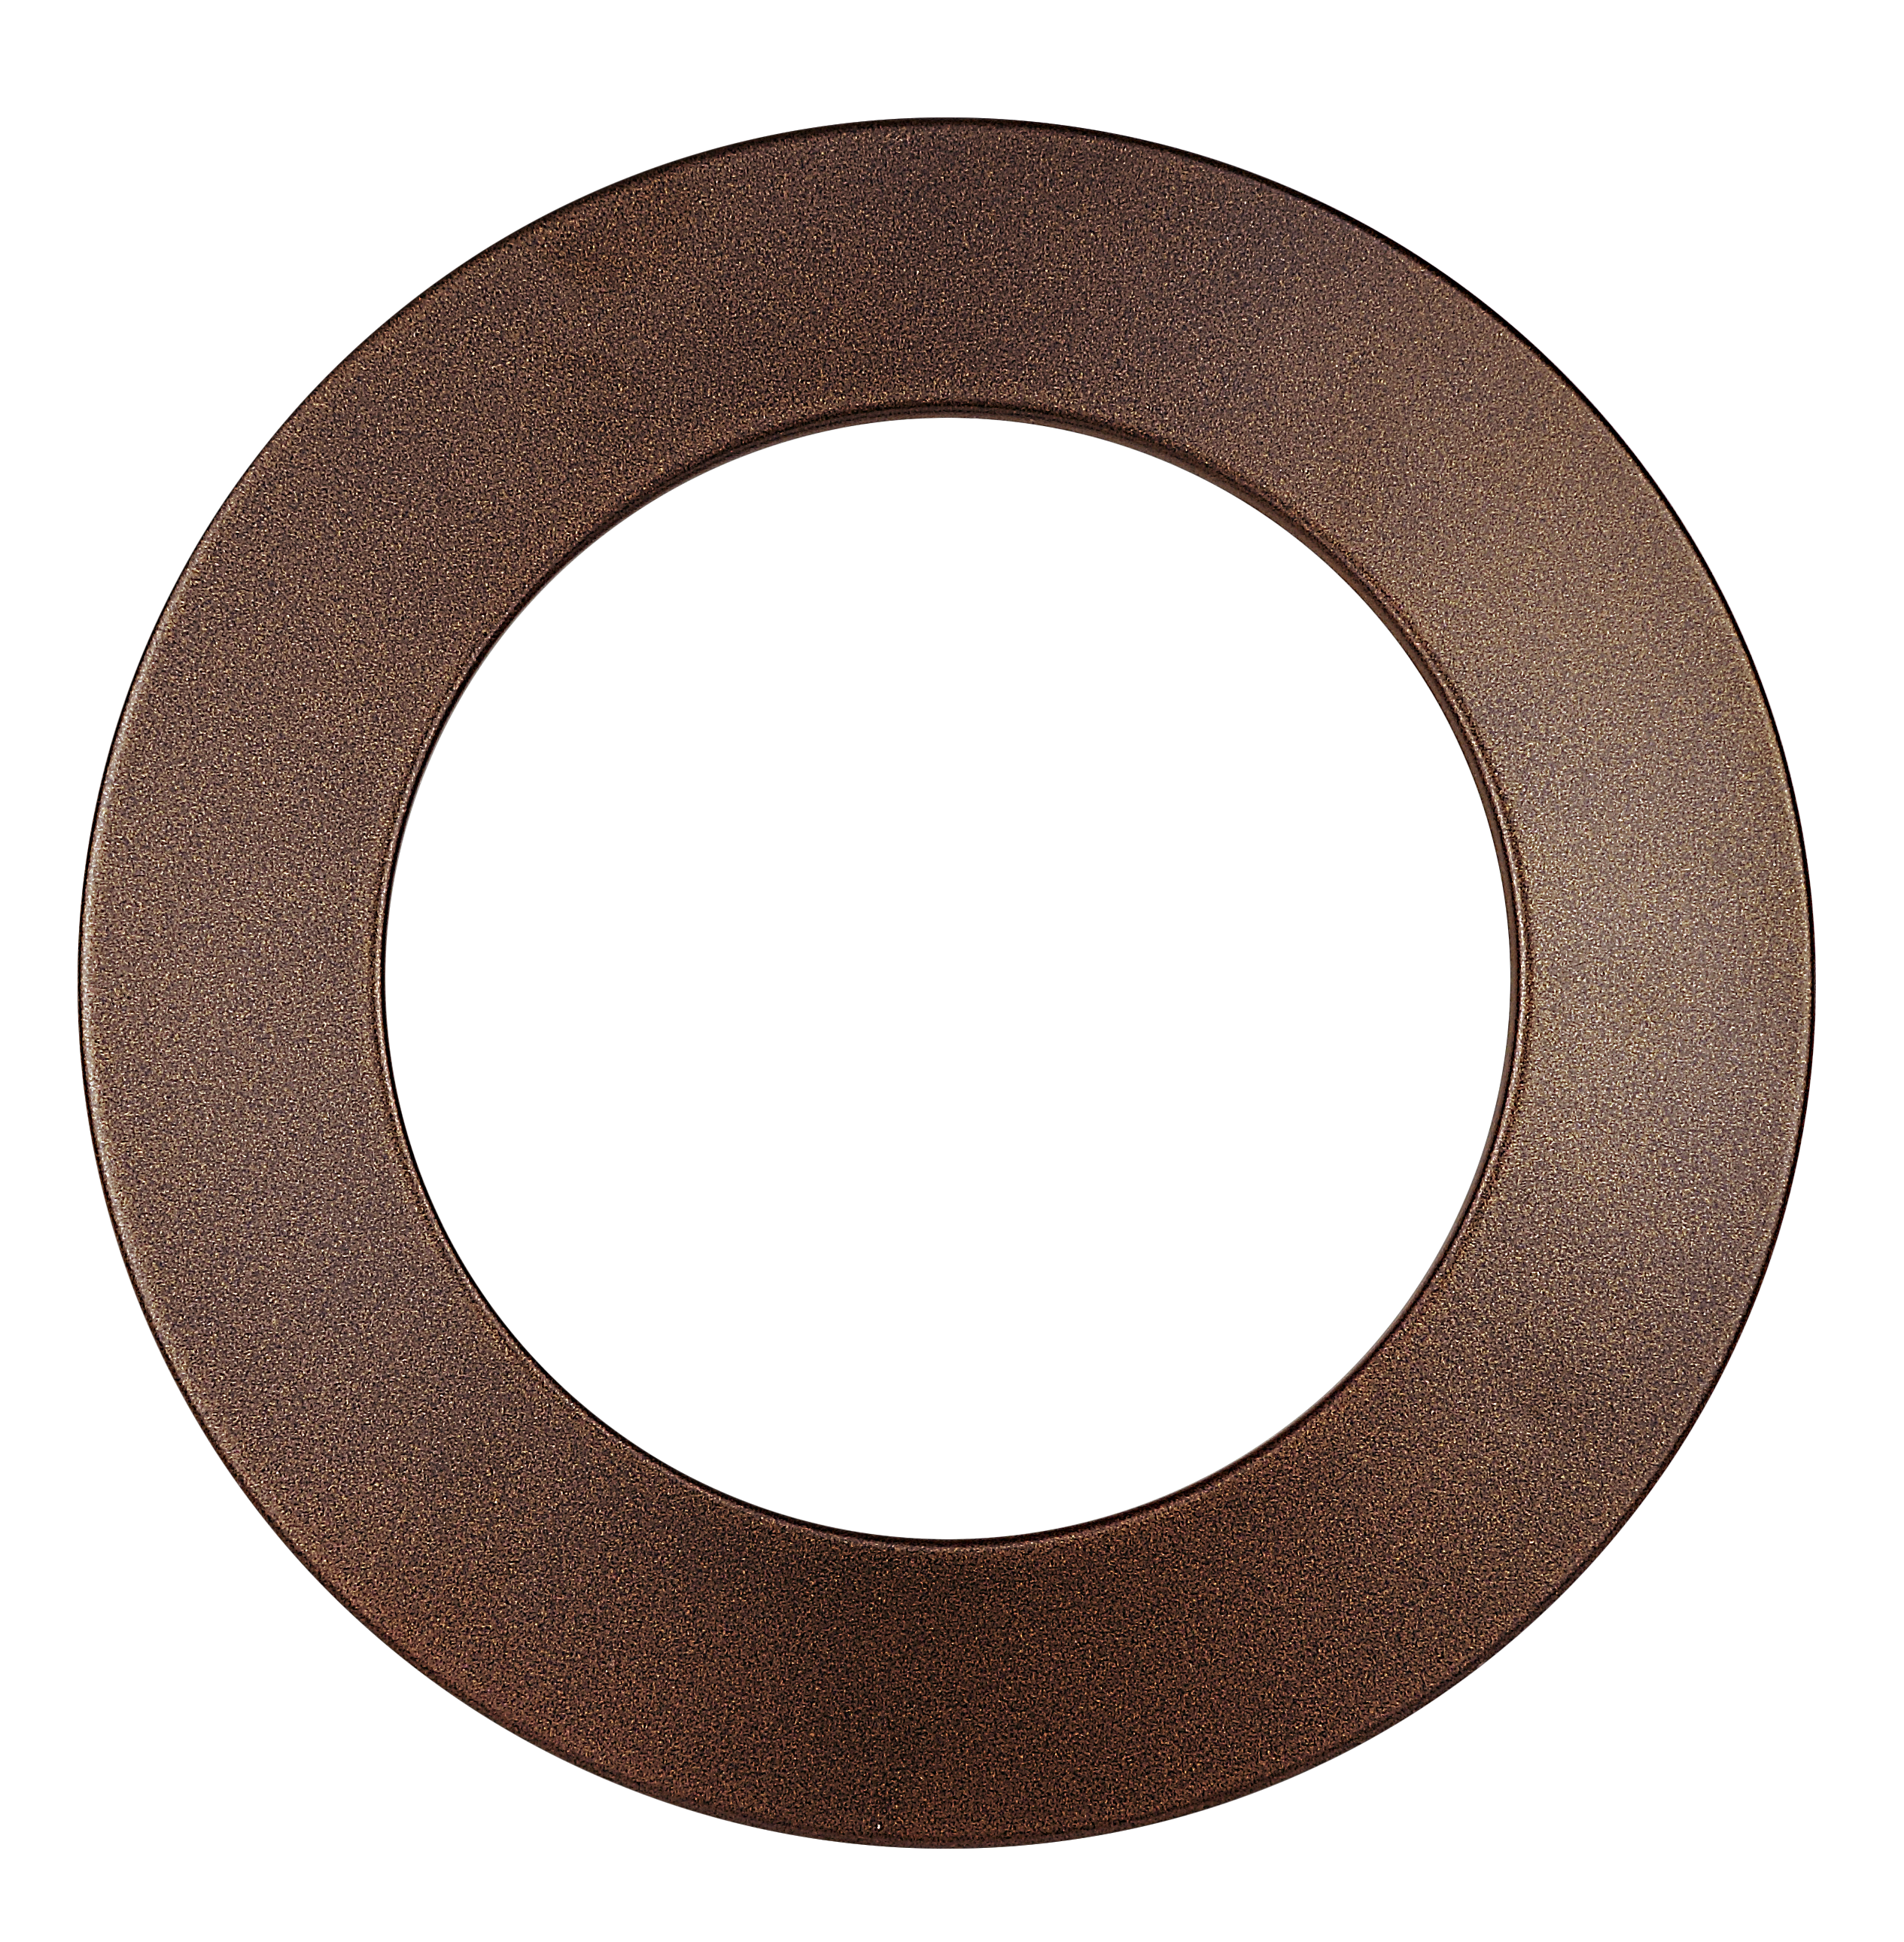 Westgate RSL4-TRM-ORB 4" Round Trim for Rsl4 Series Residential Lighting - Oil-Rubbed Bronze